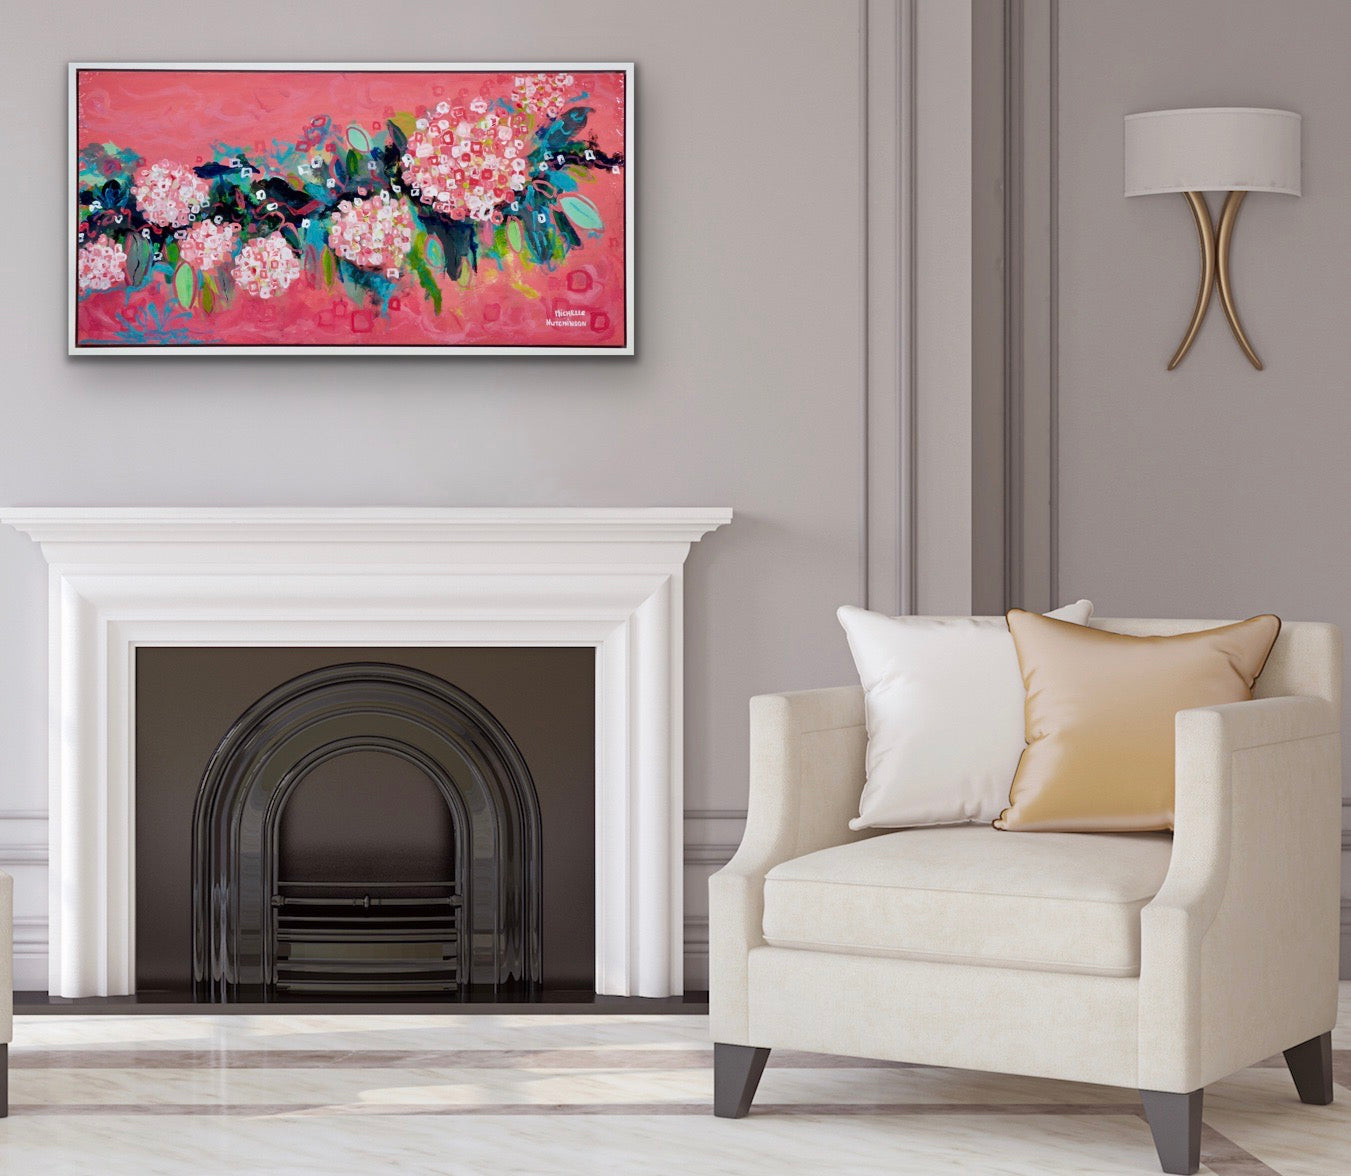 Vibrant corals and pinks contemporary hydrangea above a white fireplace.